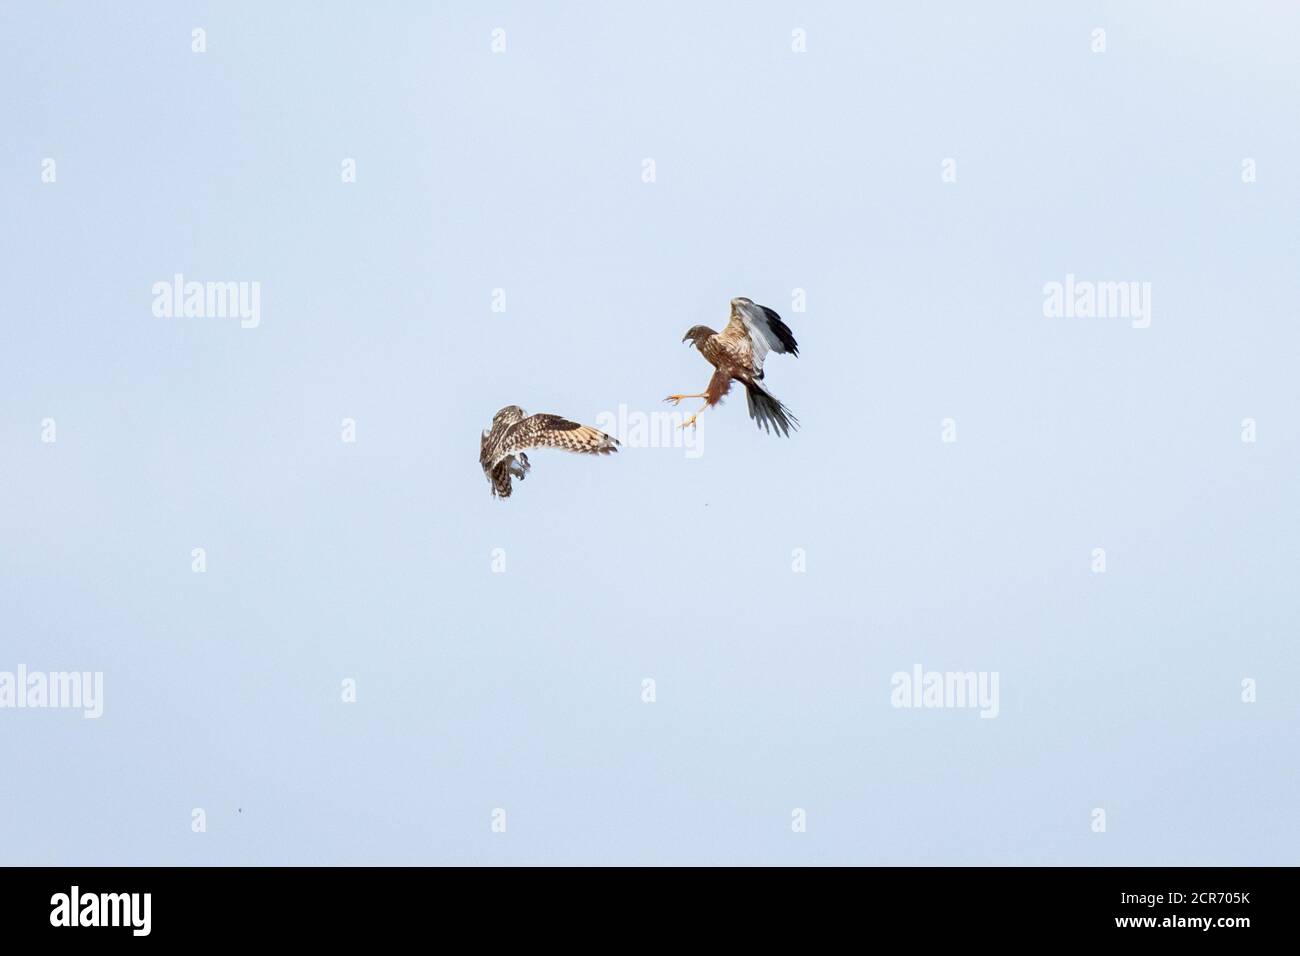 Germany, Lower Saxony, Juist, Marsh Harrier (Circus aeruginosus), in a dogfight with a short-eared owl. Stock Photo